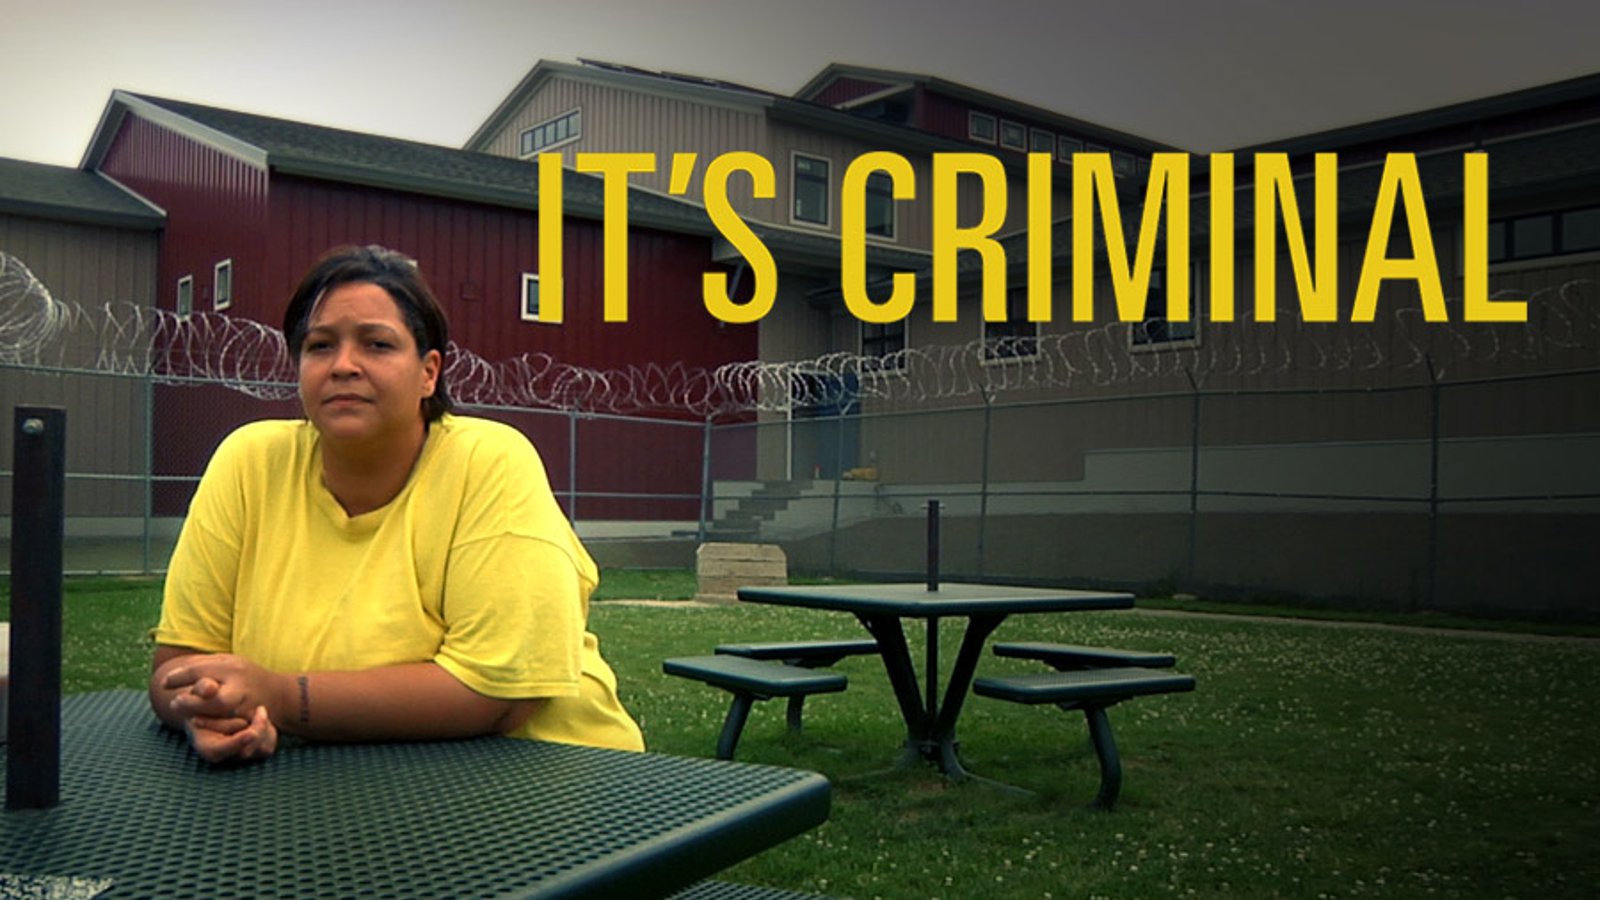 It's Criminal - Women Discuss Privilege, Poverty, and Injustice in America